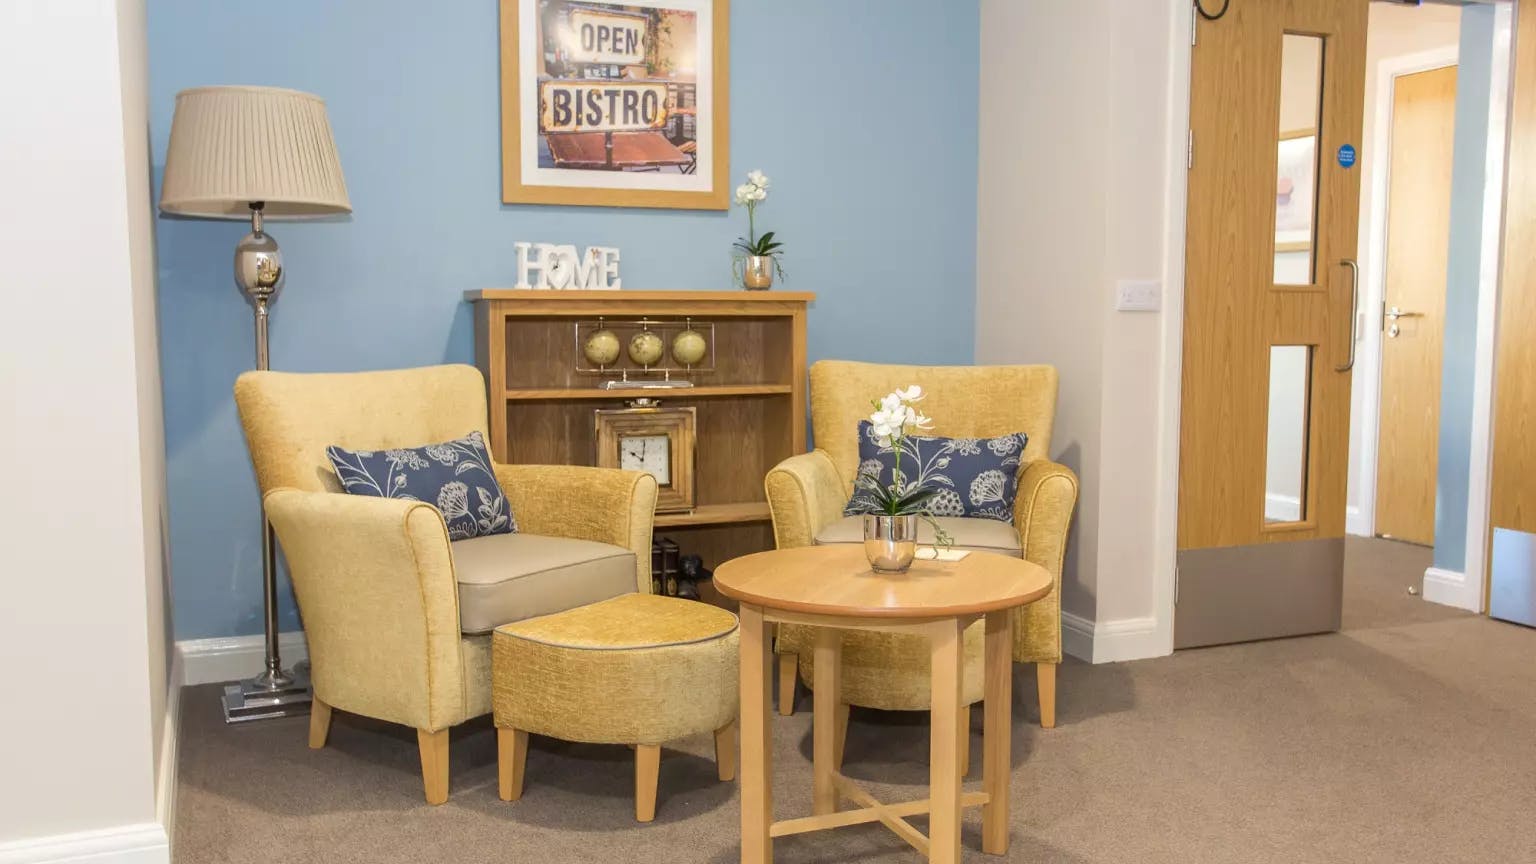 Lounge of Anson Court care home in Welwyn Garden City, Hertfordshire